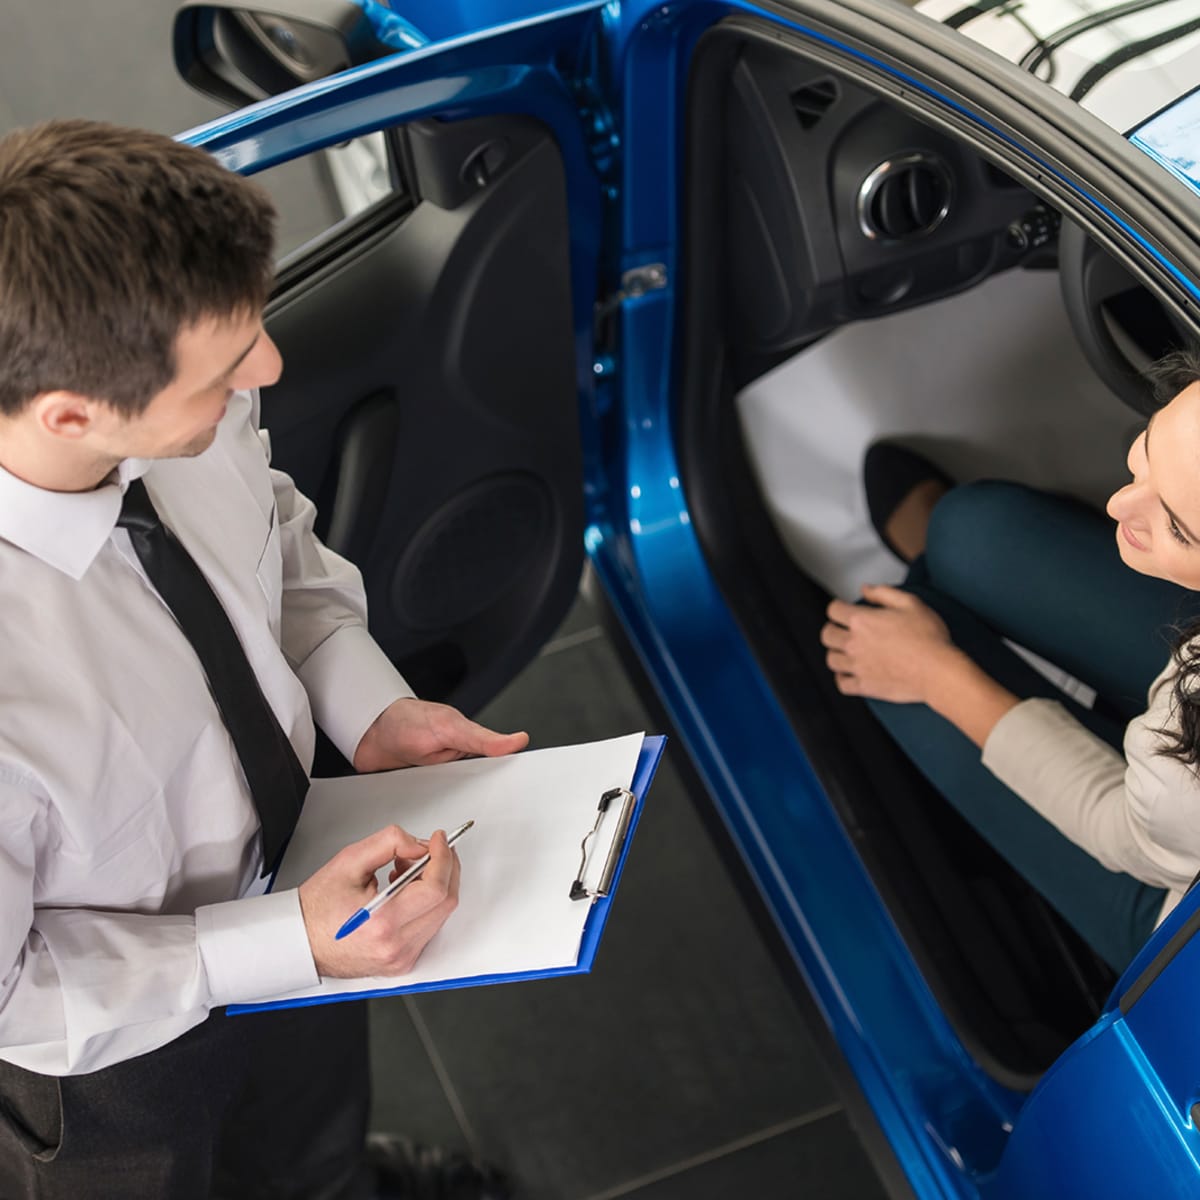 How To Lease A Car In 7 Steps And When Leasing Is A Good Idea - Thestreet